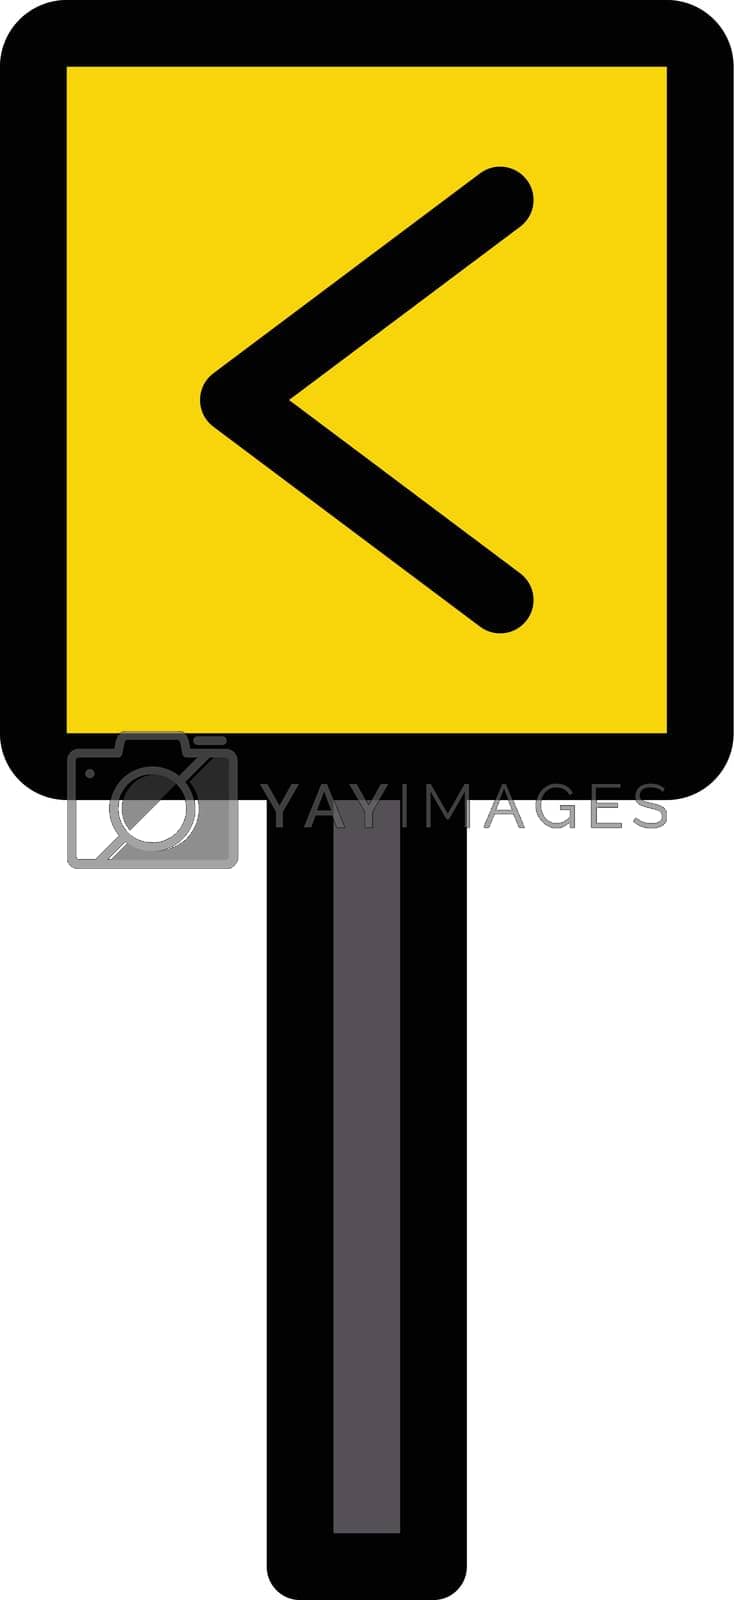 Royalty free image of direction board by vectorstall